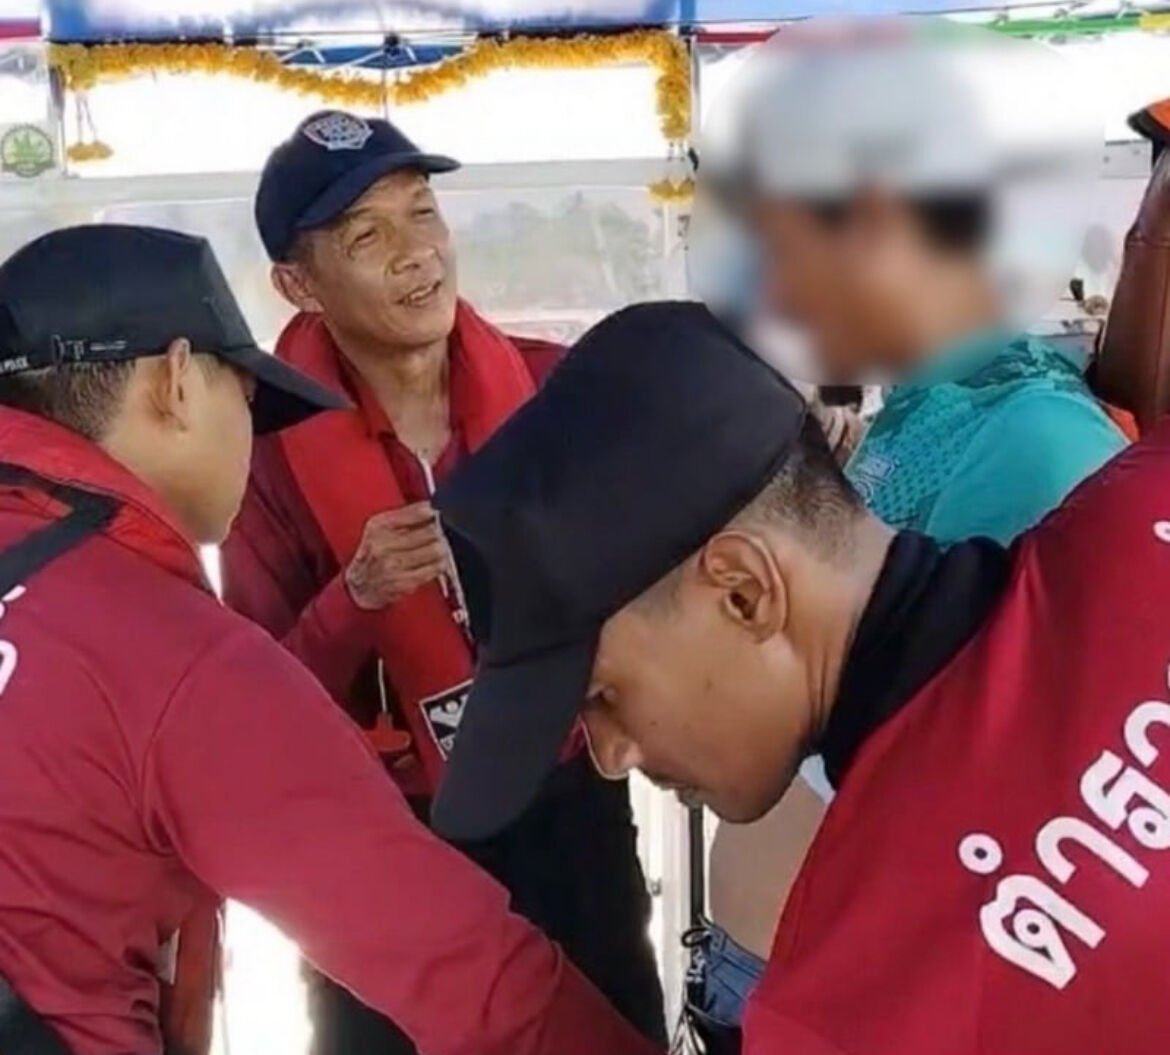 Tides of tranquility disrupted: Yaba drug bust rocks Phi Phi, Krabi | News by Thaiger